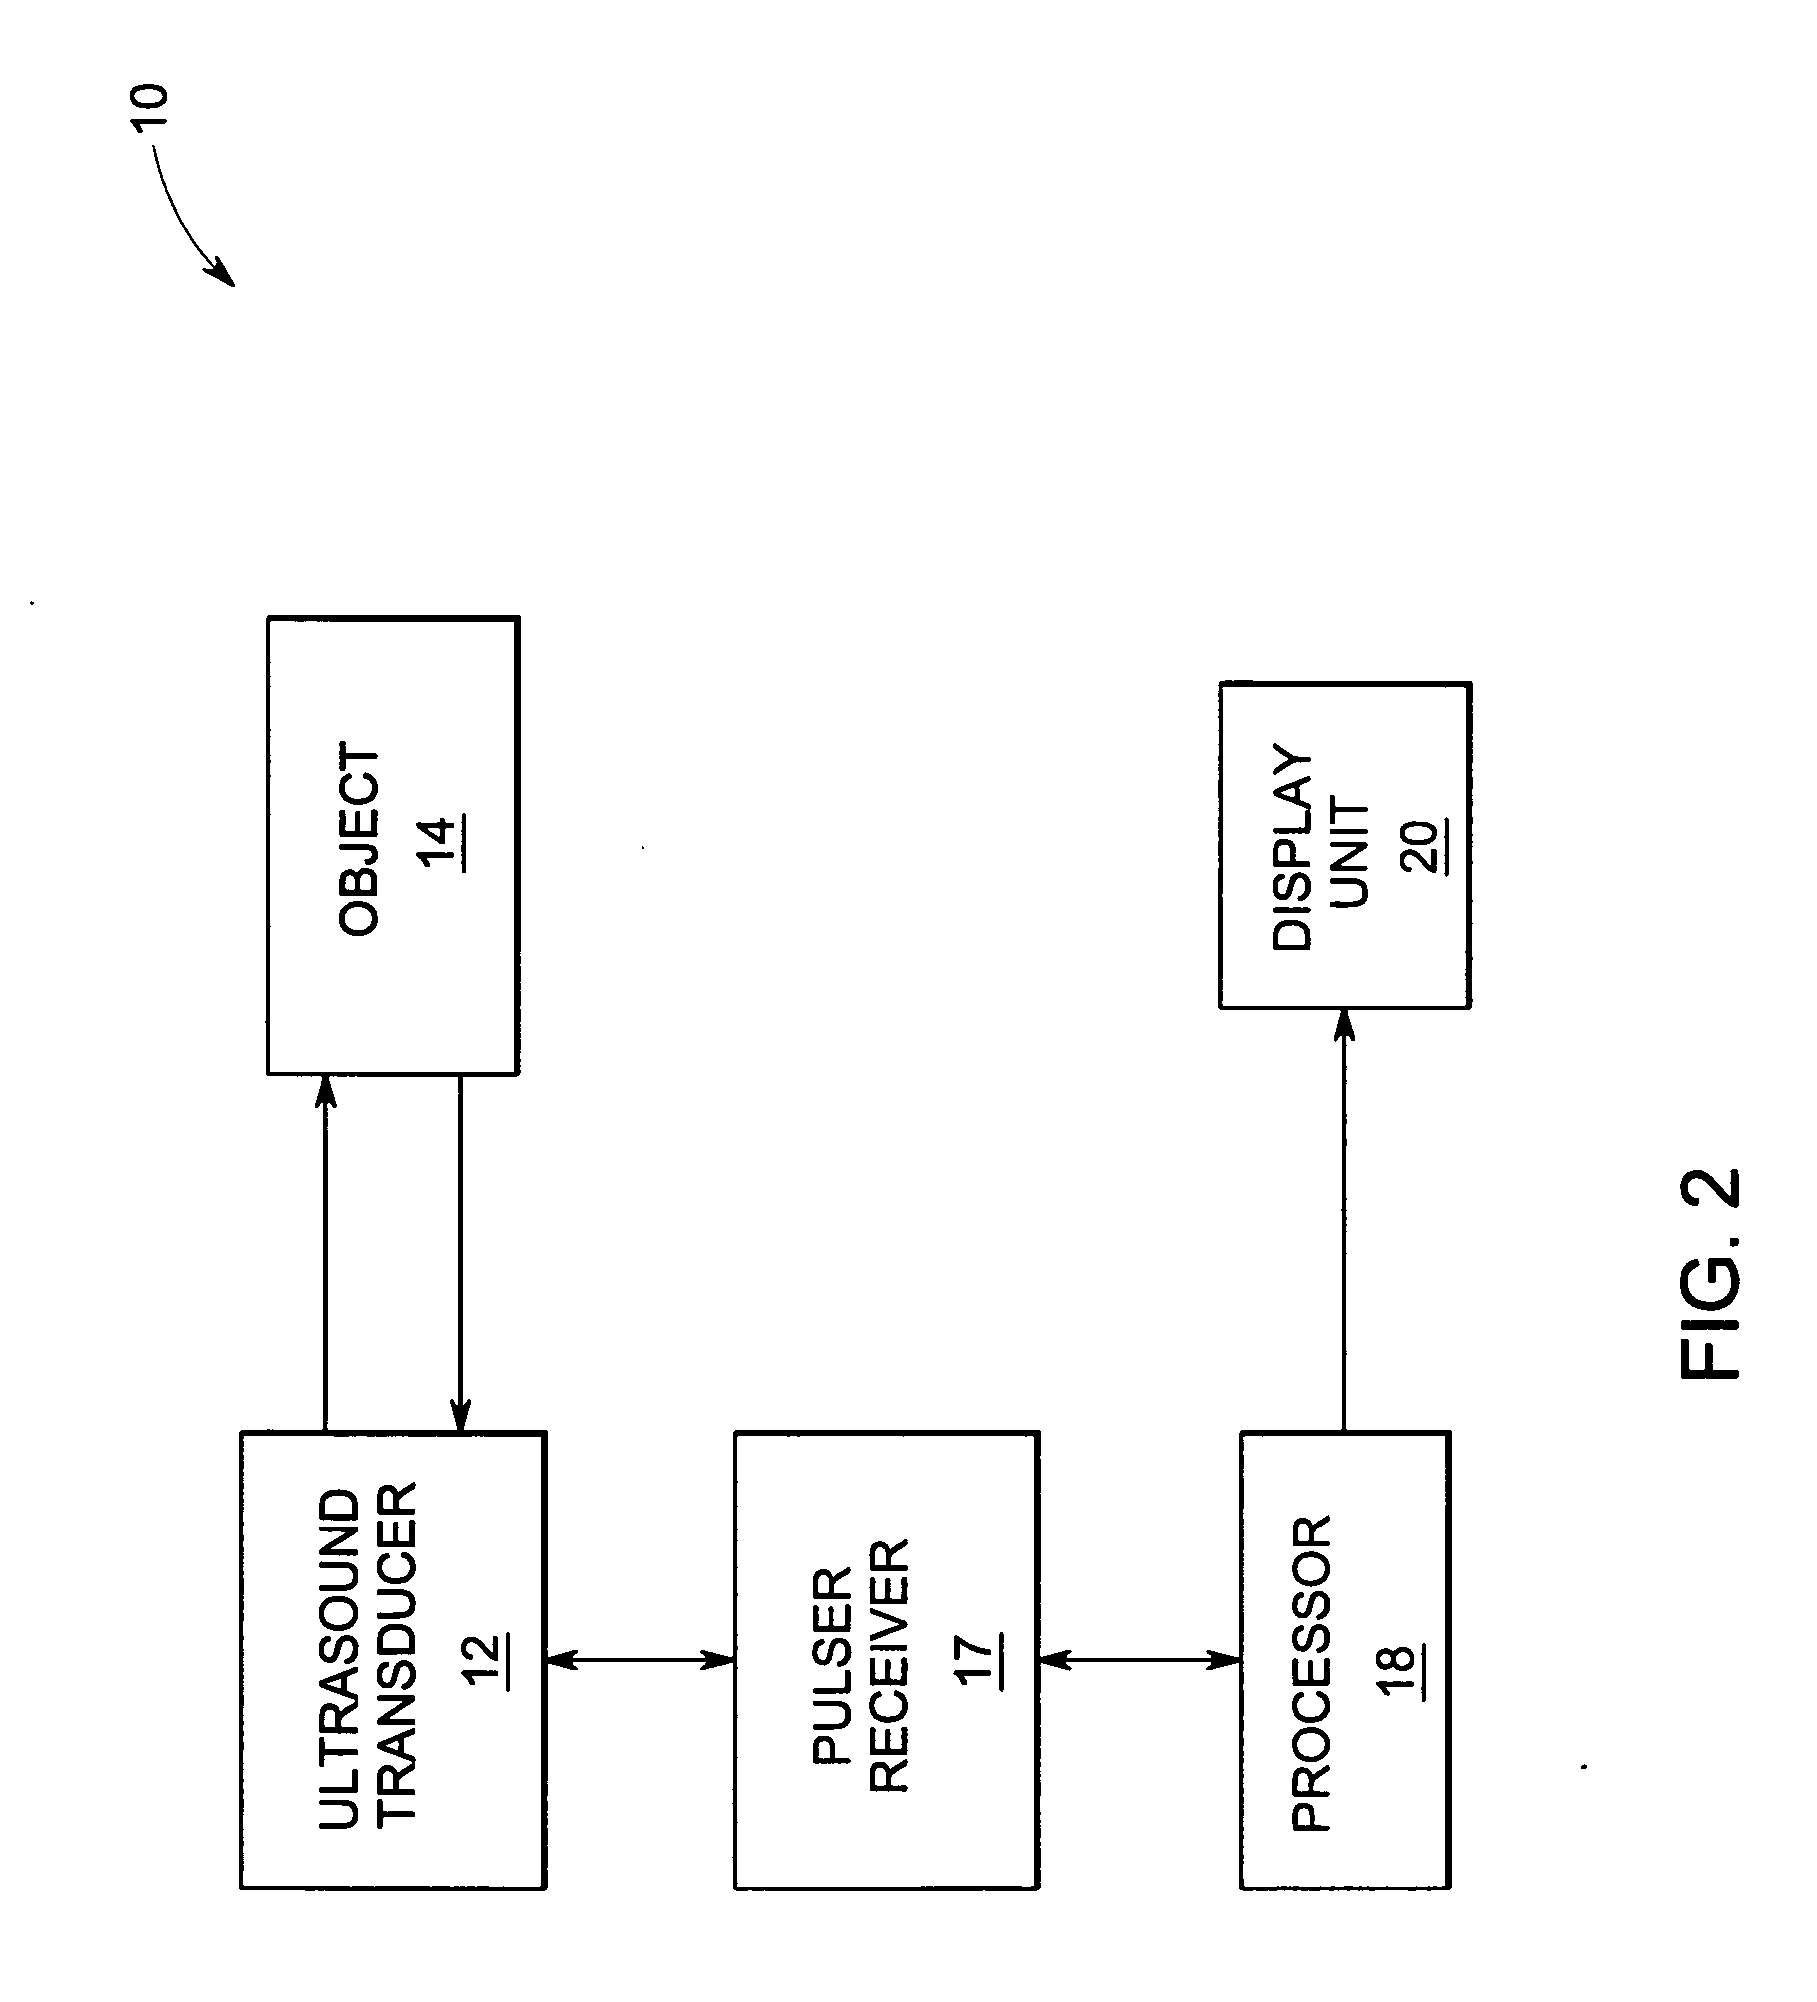 Ultrasonic inspection system and method